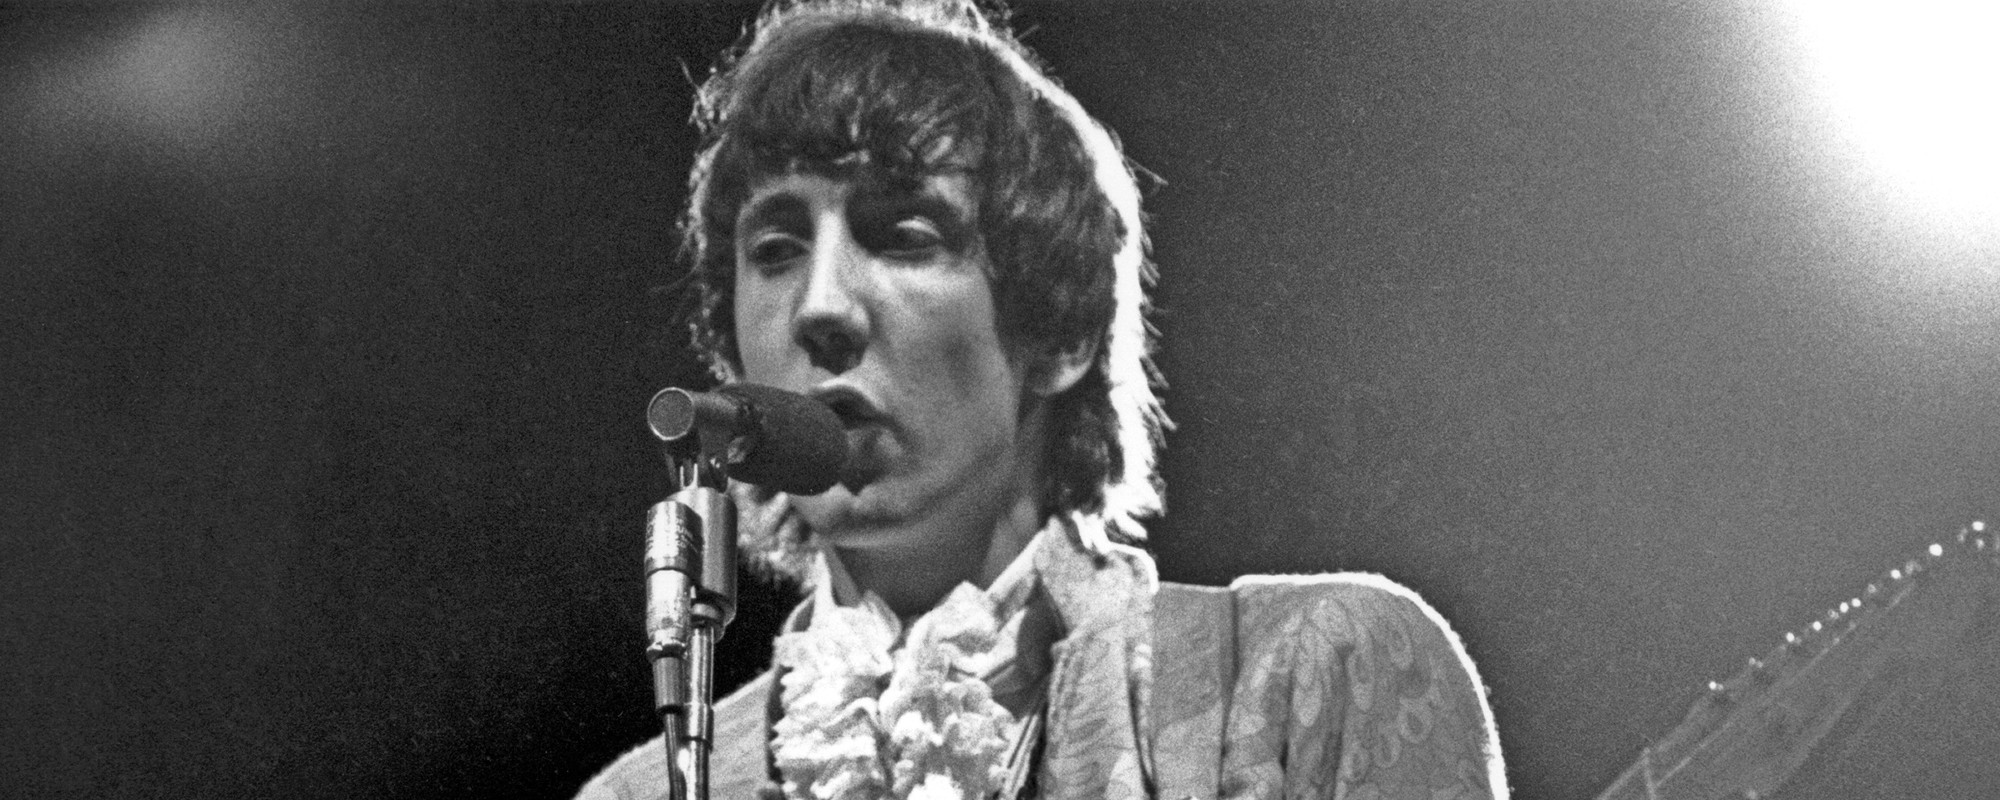 The Meaning Behind “I Can See for Miles” by The Who and the Jealousy that Inspired It